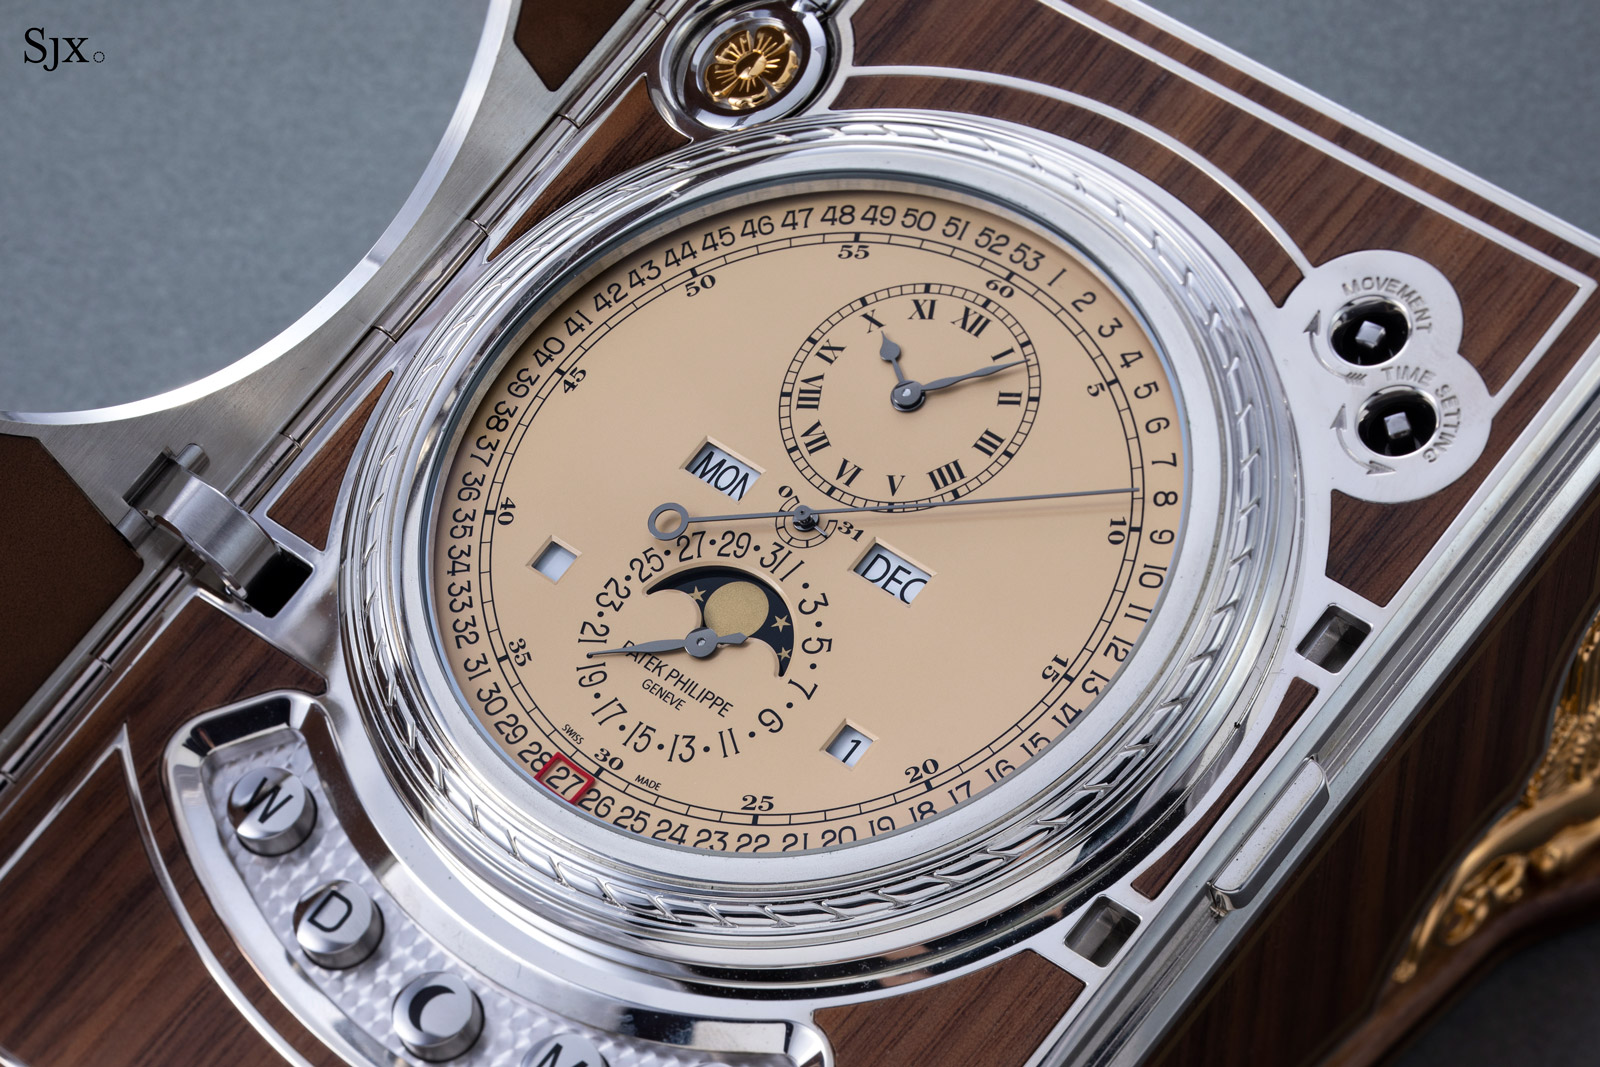 Hands-On: Patek Philippe Complicated Desk Clock “Only Watch” Ref. 27001M-001